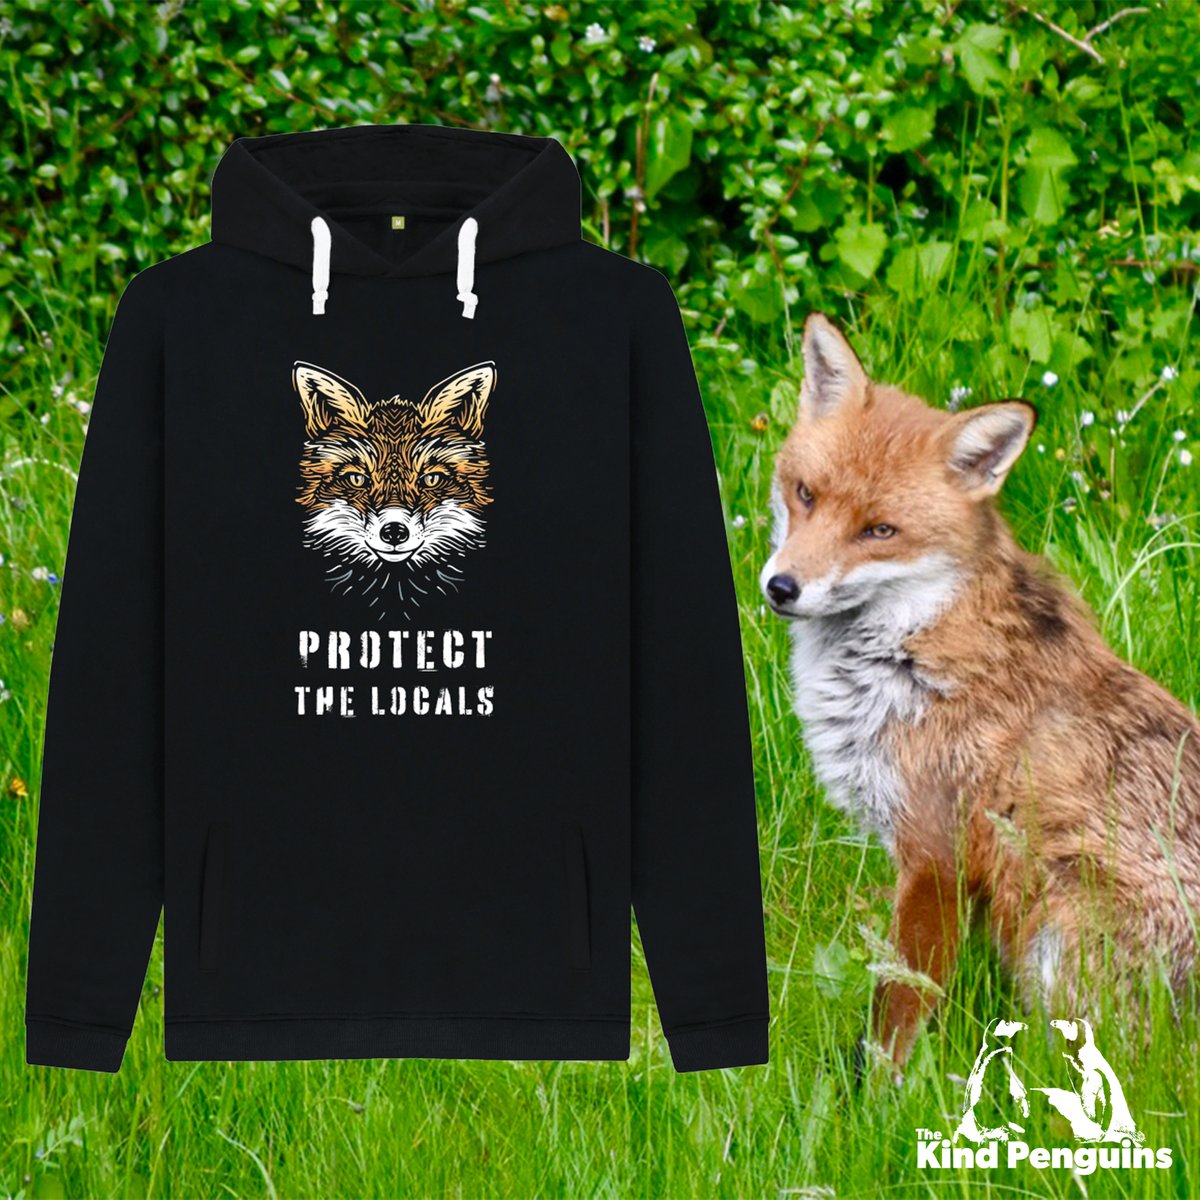 Nature needs a helping hand, so we created a cruelty-free, vegan-friendly 'Protect the locals' range of organic clothing, including reminders to be kind to our foxes, hedgehogs, badgers and others. Find them at: kindpenguins.com/animal-art

#mammalsatrisk #wildlife #nature #fox 🦊❤️